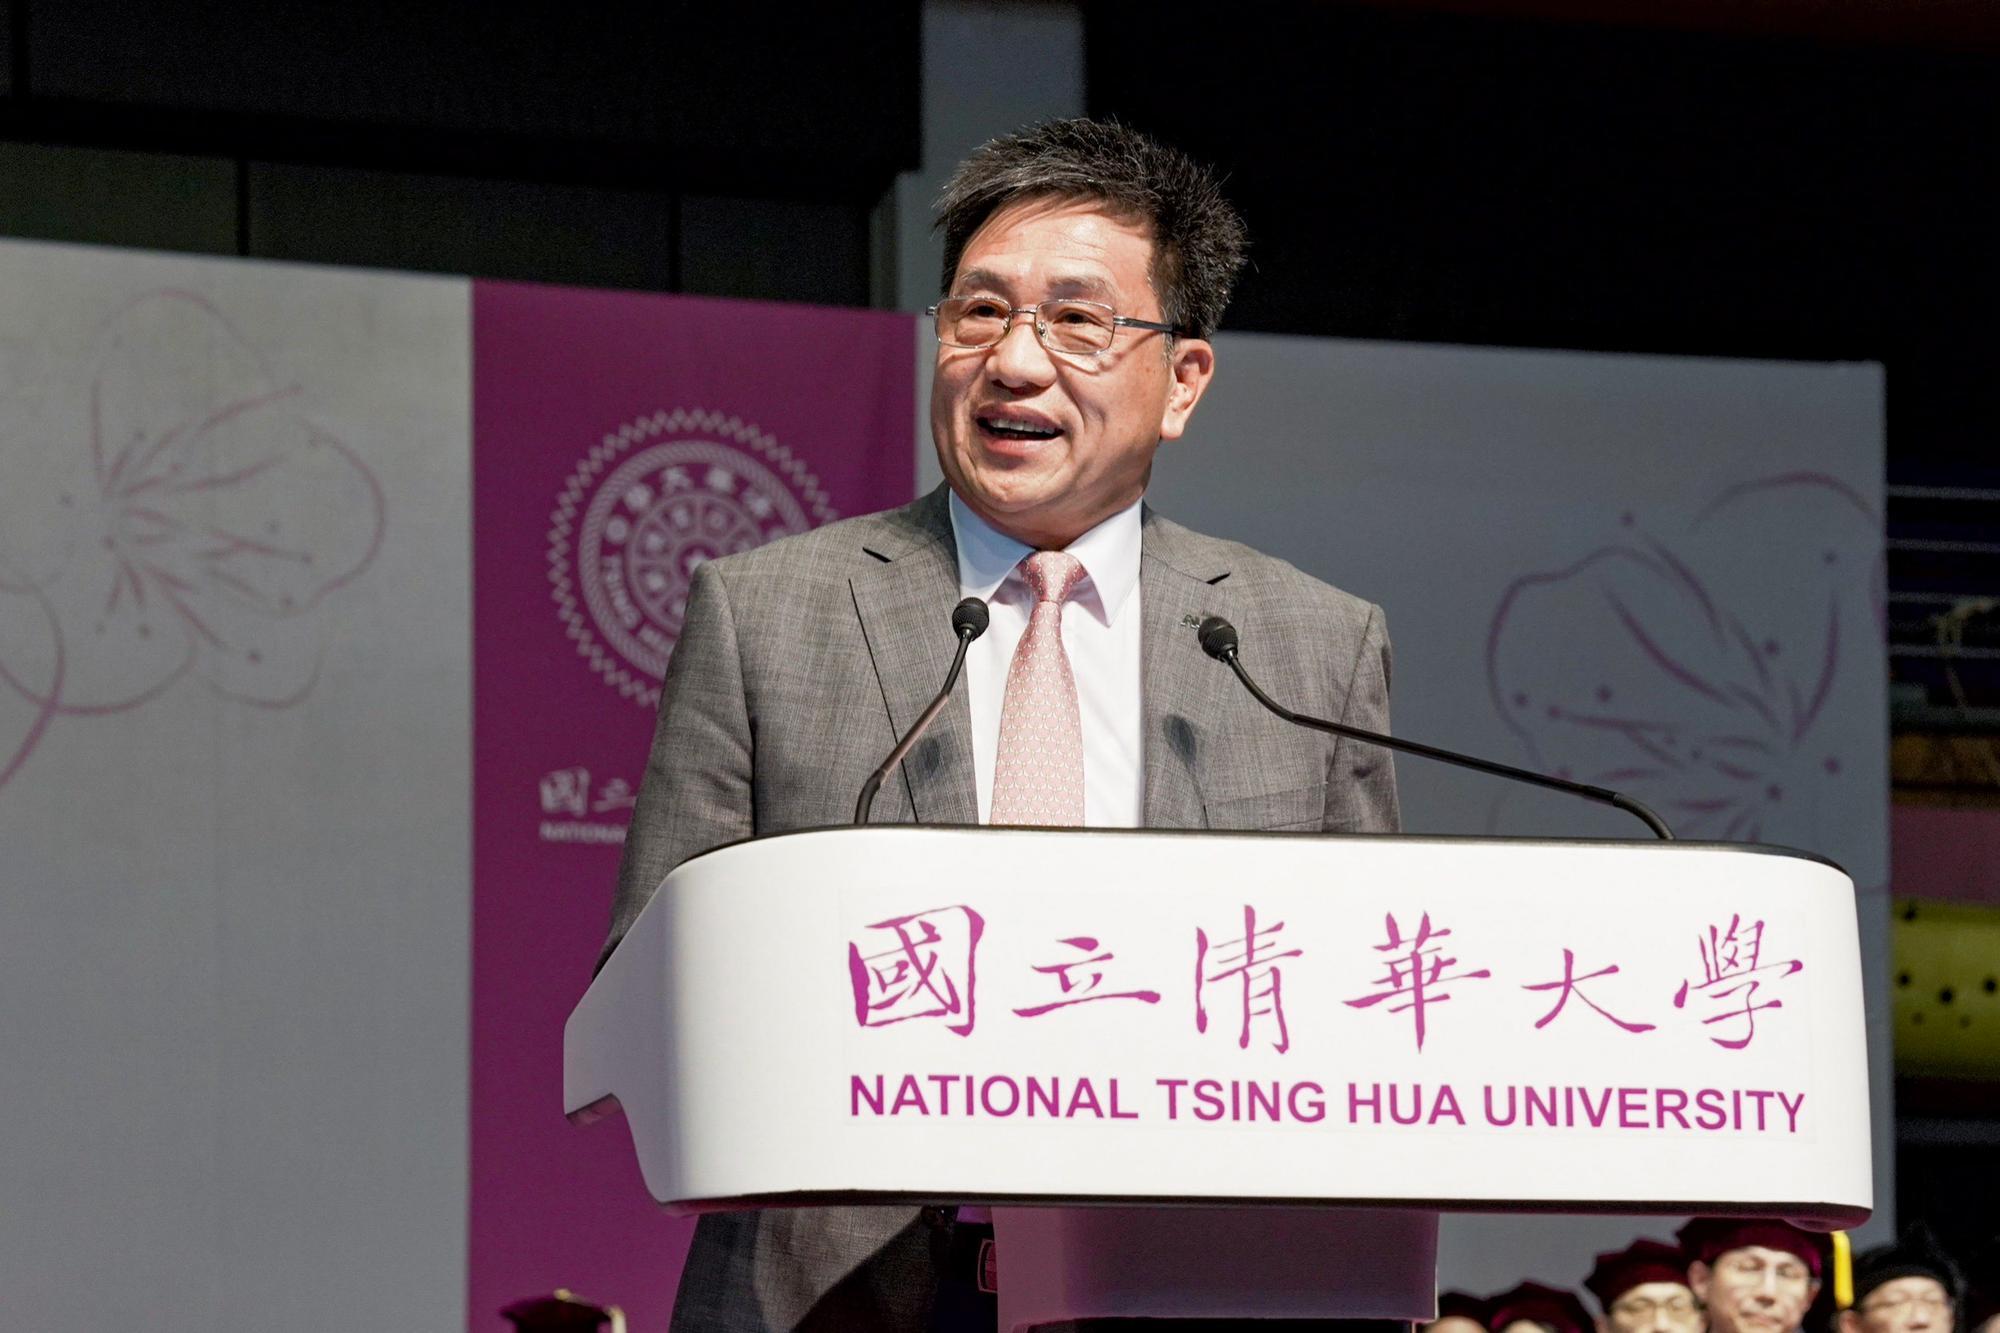 Chairman of AUO Paul SL Peng (彭双浪) encourages the graduating students to use AI wisely for lifelong learning.